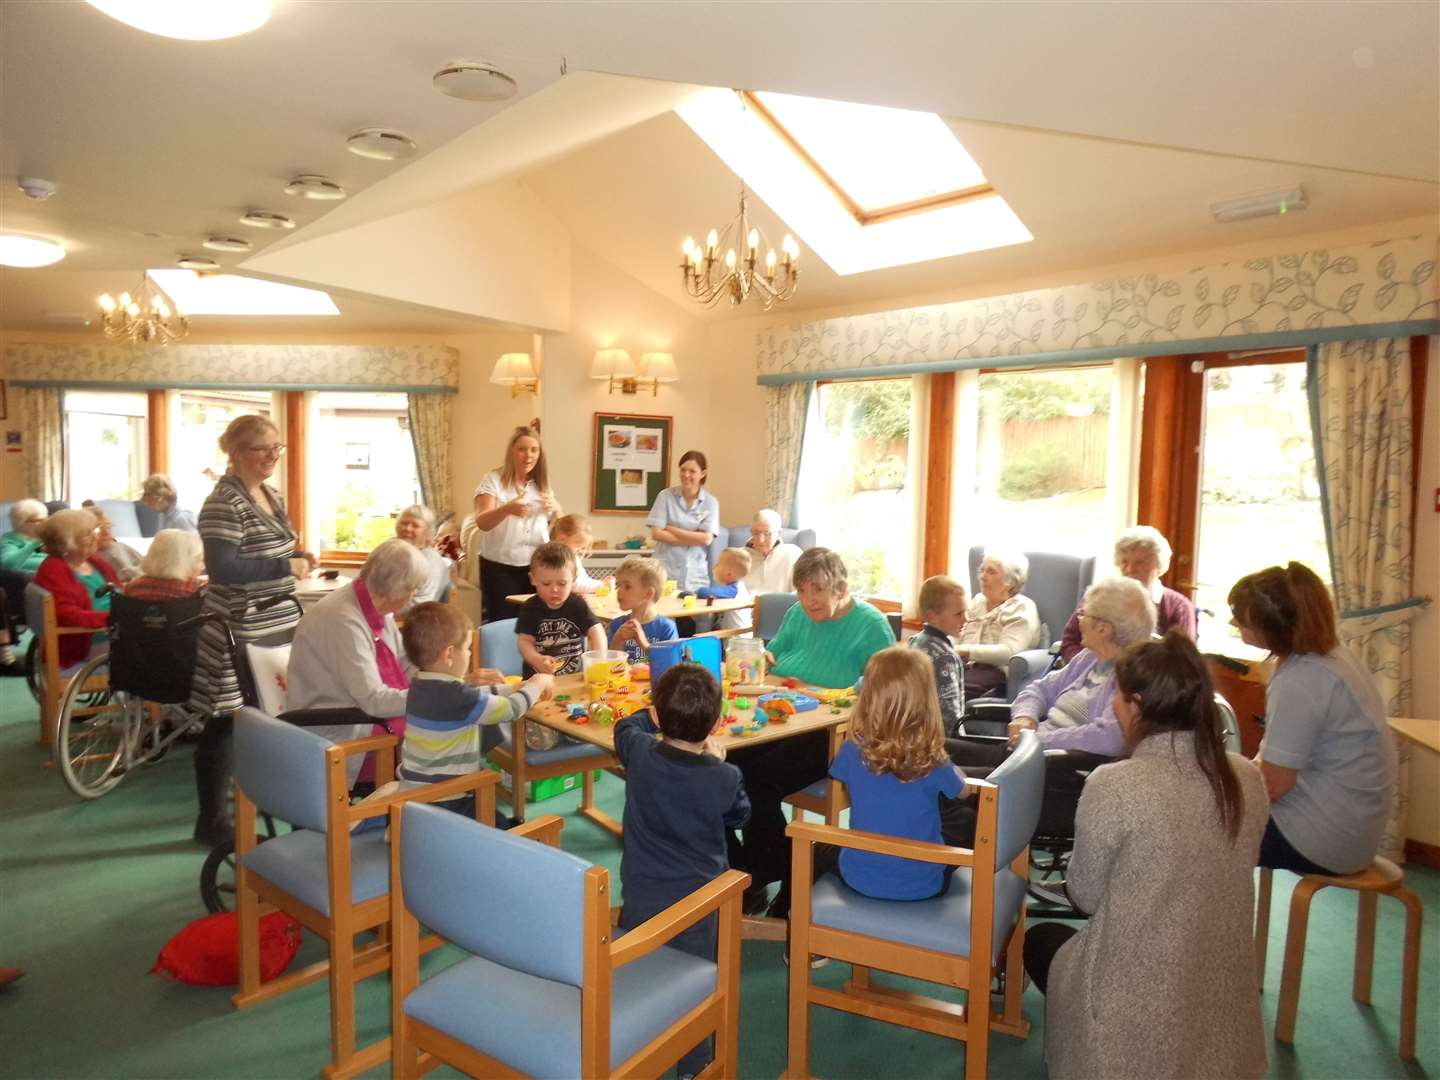 The children from Pilmuir nursery playing playdough with the residents from Meadowlark.